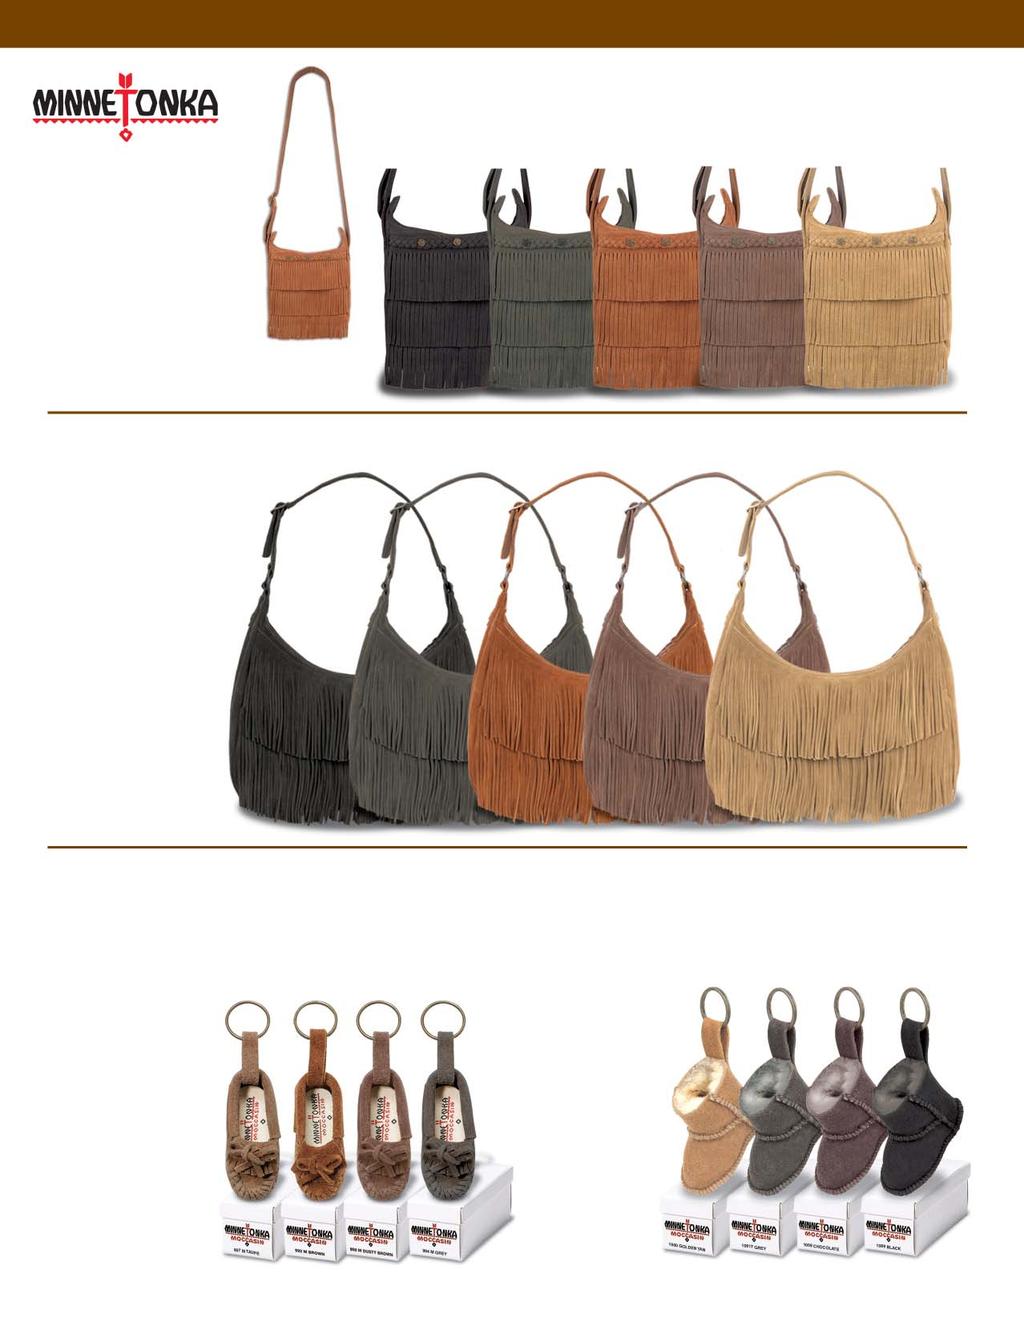 Hand Bags Cross Body Fringe Bag Adjustable strap makes this a great shoulder or cross-body handbag. Soft, supple suede leather. Inside features zipper pocket and organizer components.